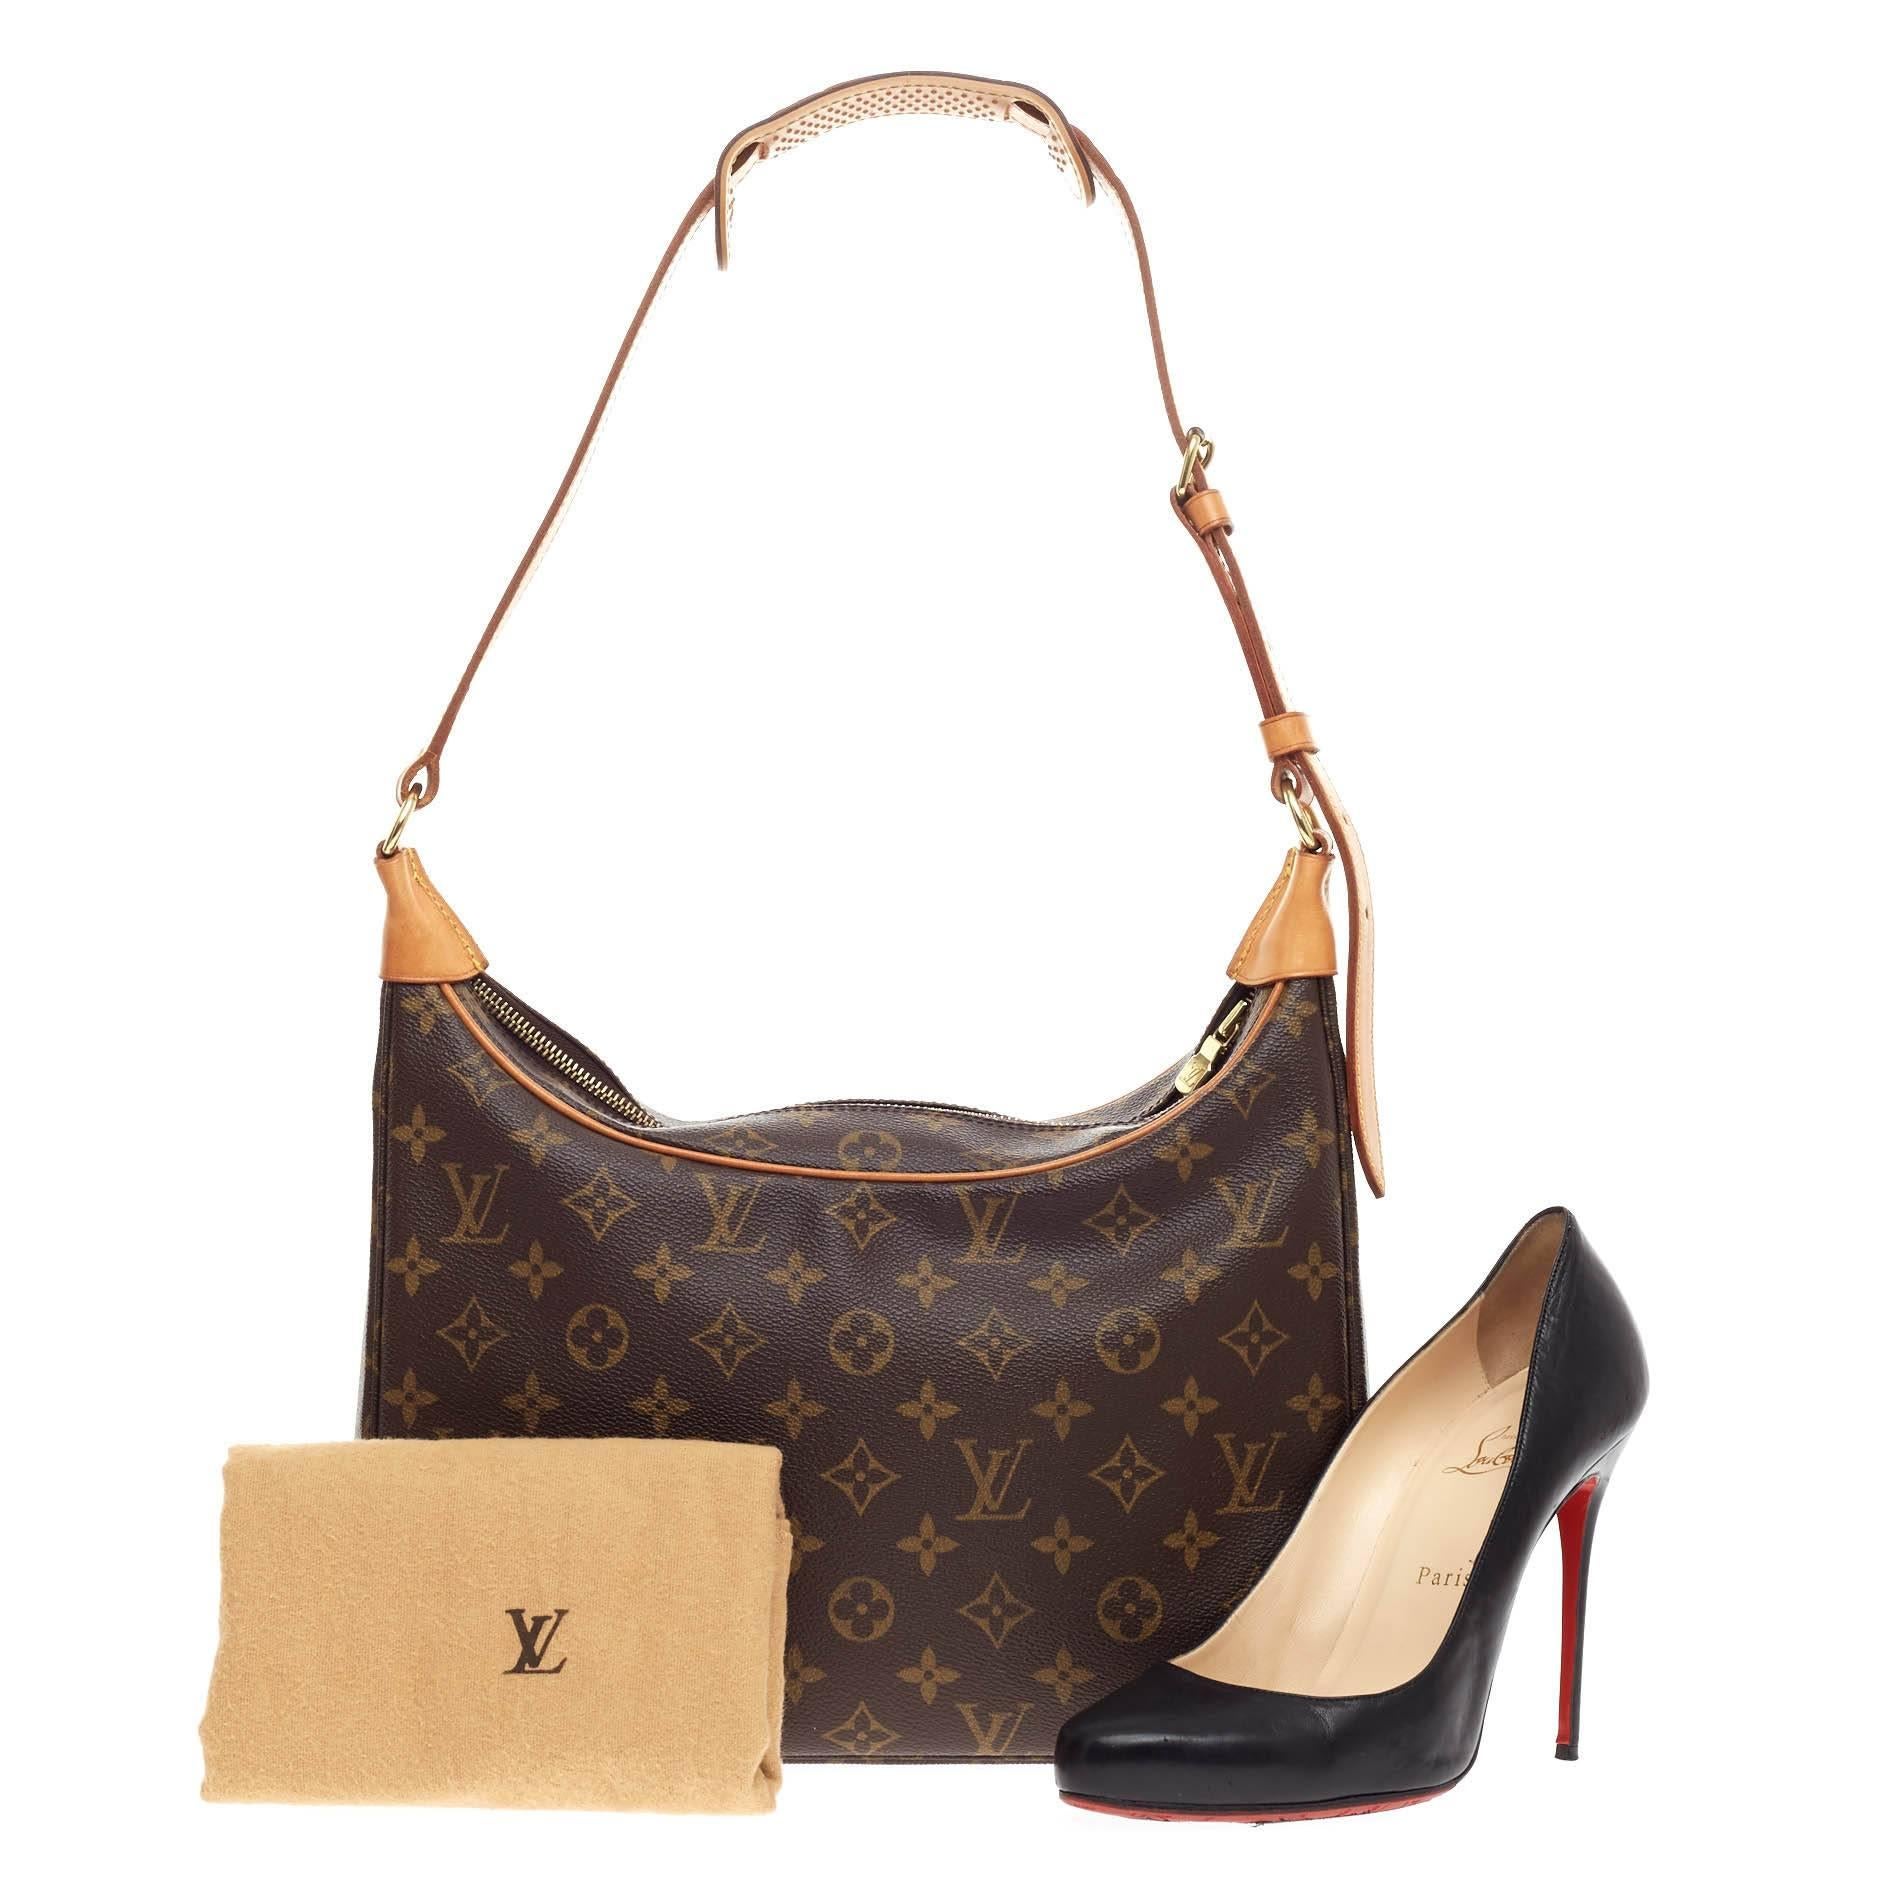 This authentic Louis Vuitton Boulogne Monogram Canvas 30 showcases a stylish design perfect for everyday use. Crafted from brown monogram printed canvas, this satchel features an adjustable vachetta leather strap, vachetta leather trims, and